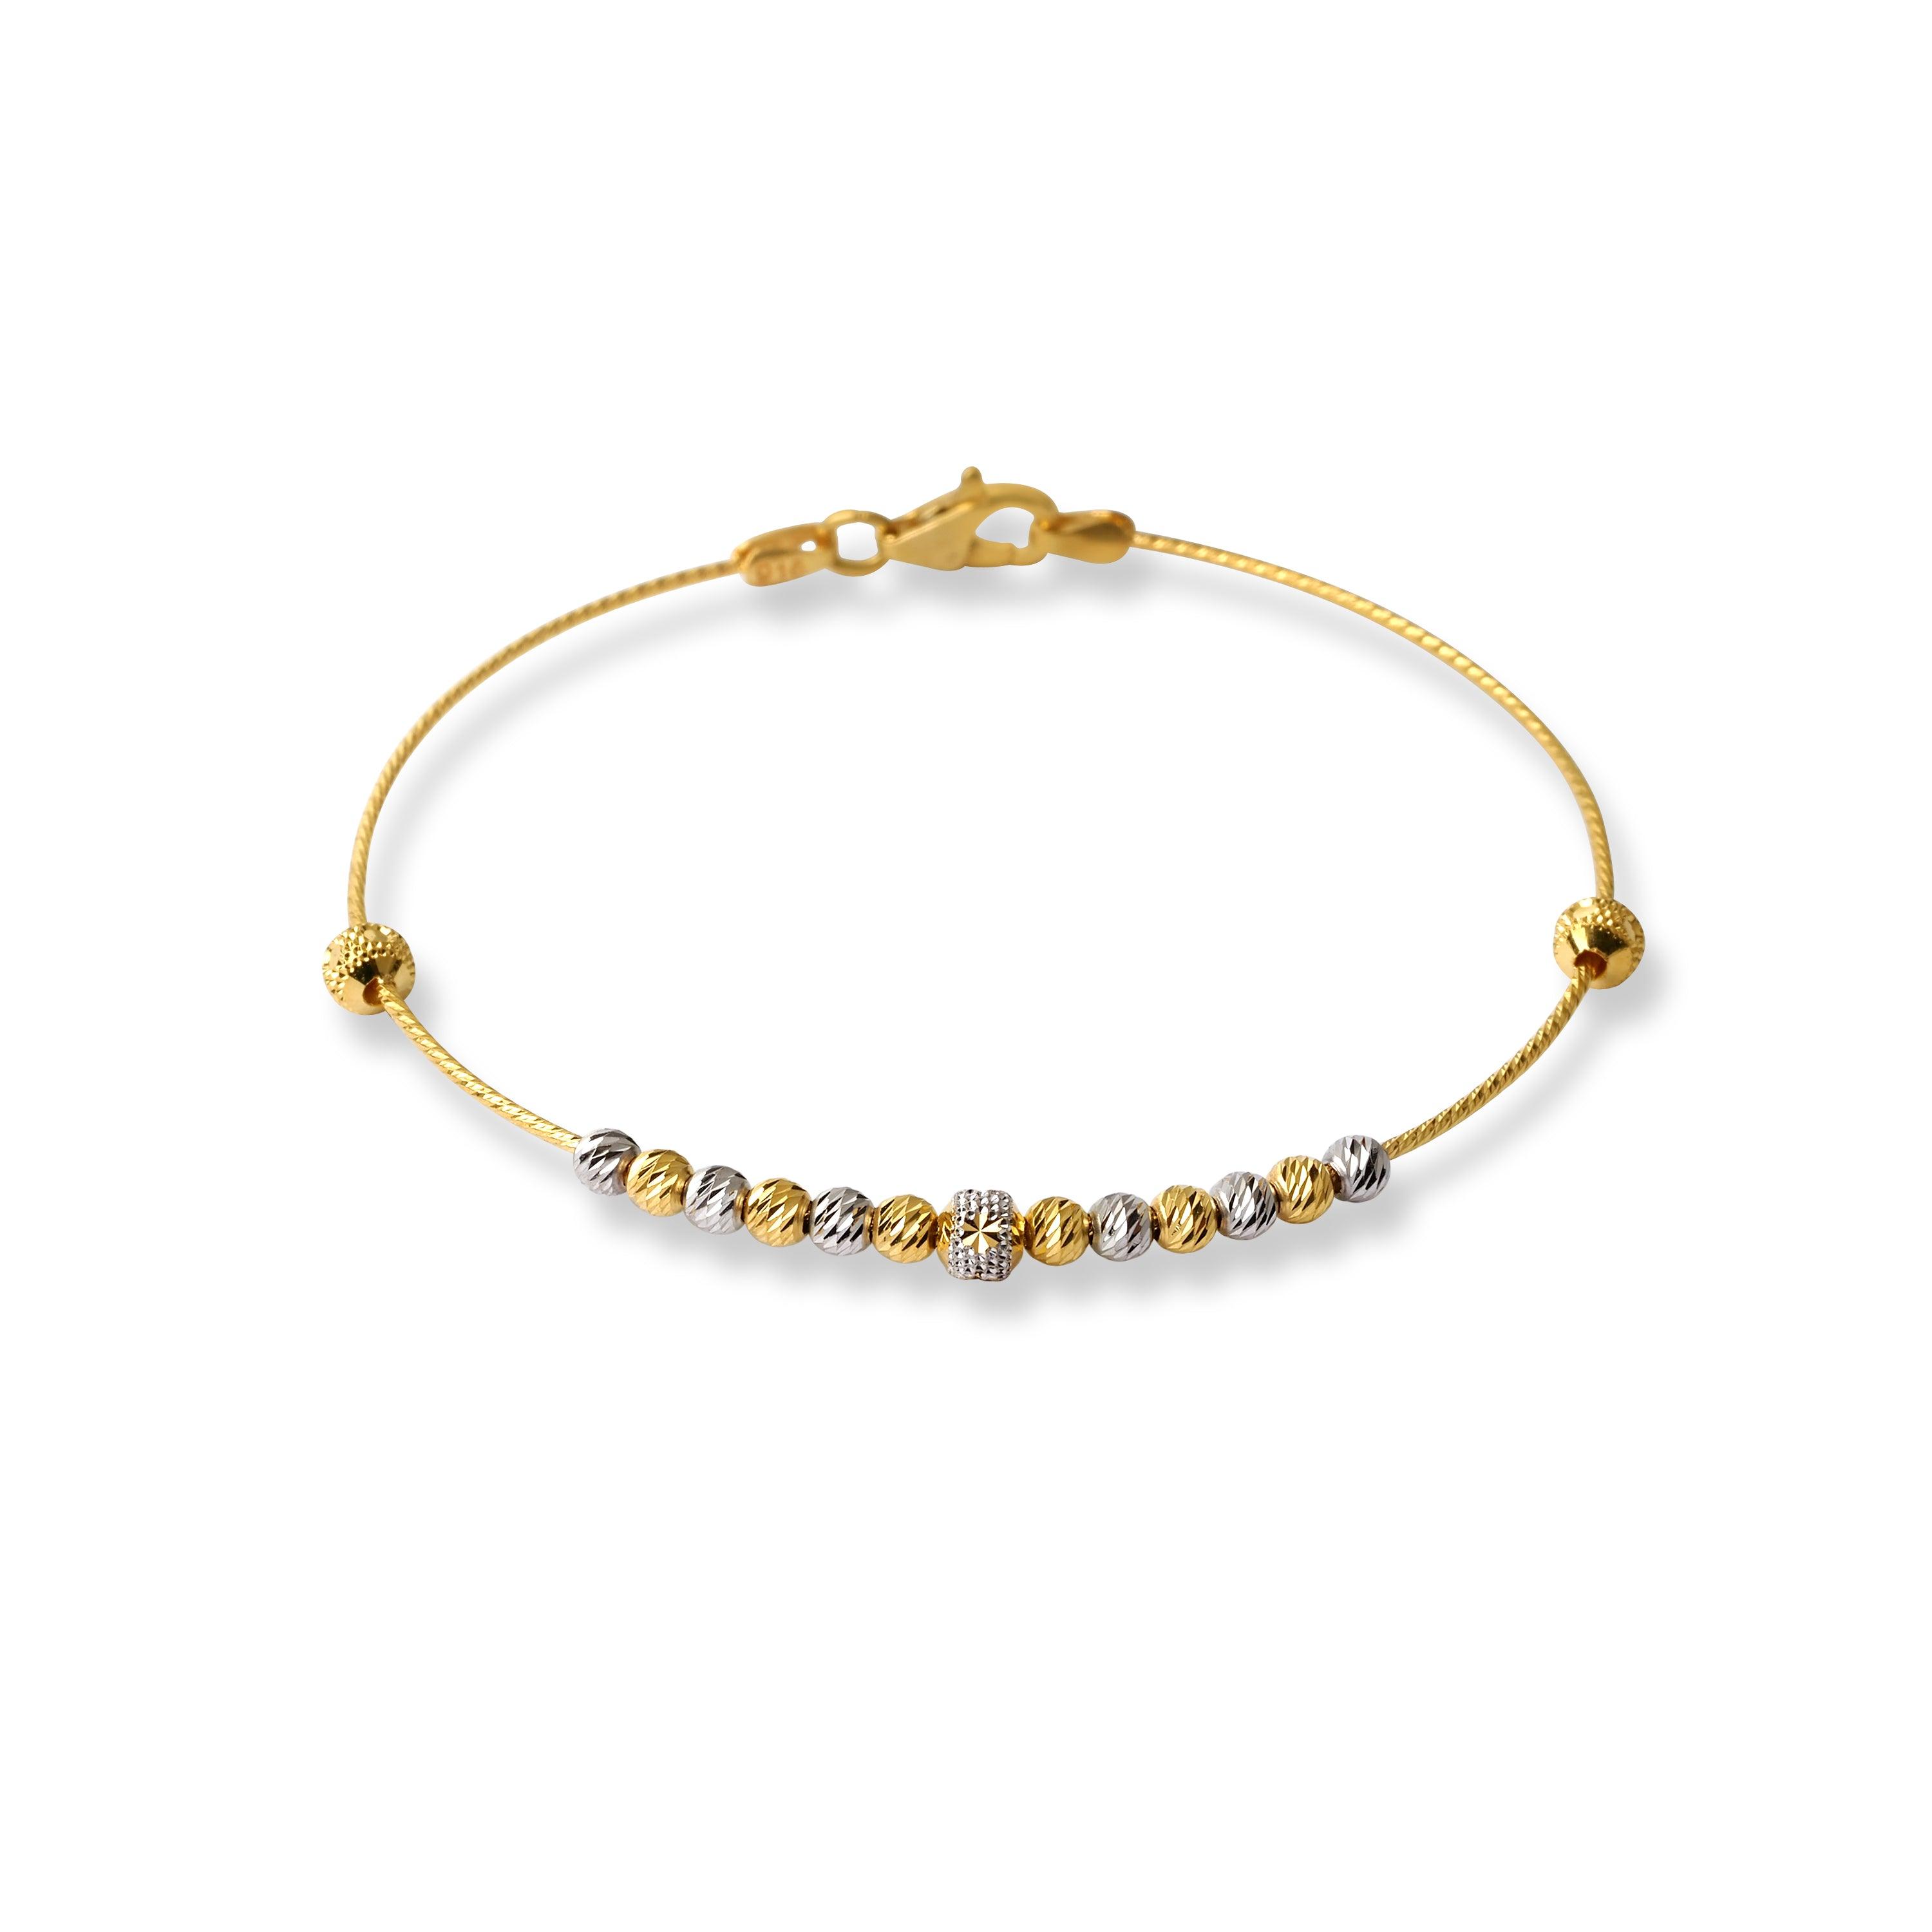 22ct Gold Rhodium Plated Beads Bangle With Rounded Trigger Clasp (4.4g) B-8531 - Minar Jewellers